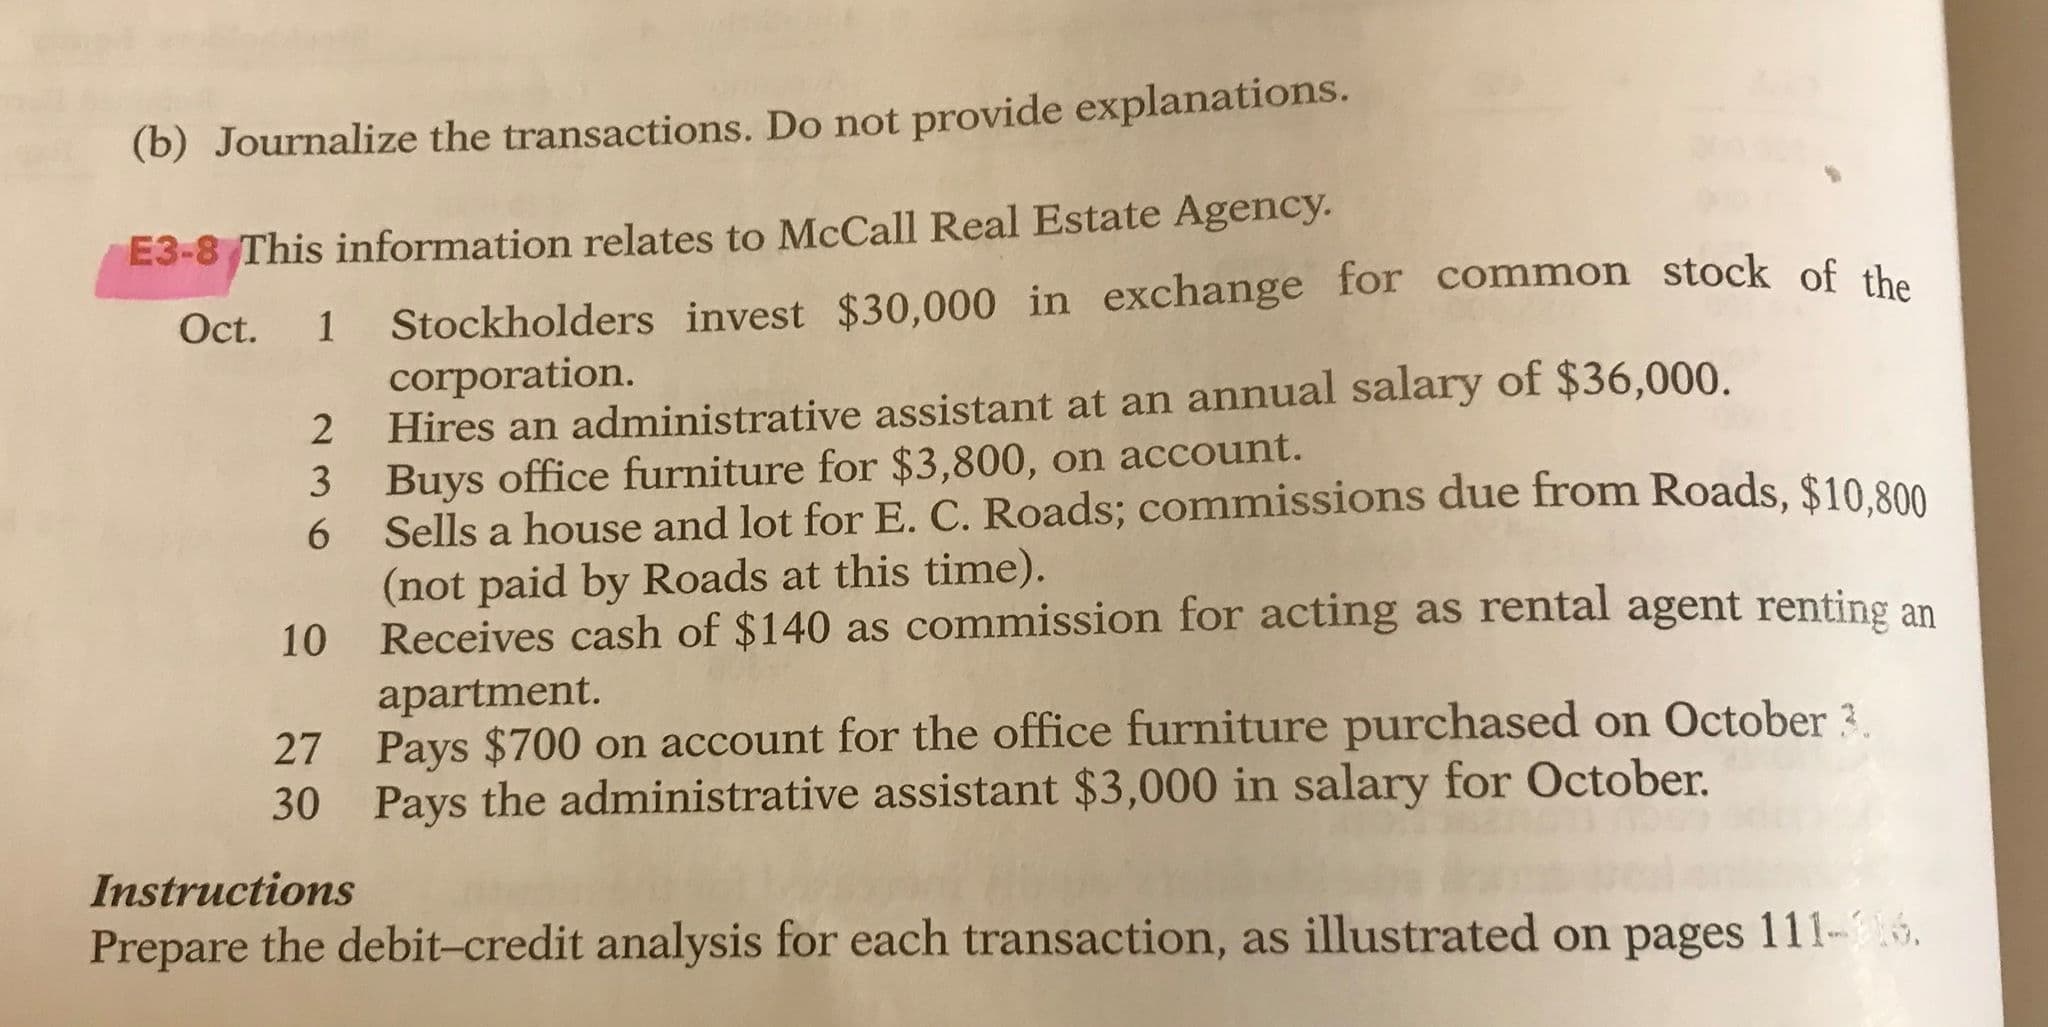 (b) Journalize the transactions. Do not provide explanations.
E3-8 This information relates to McCall Real Estate Agency.
Stockholders invest $30,000 in exchange for common stock of the
corporation.
Hires an administrative assistant at an annual salary of $36,000.
Buys office furniture for $3,800, on account.
Oct.
3
Sells a house and lot for E. C. Roads; commissions due from Roads, $10.800
6.
(not paid by Roads at this time).
Receives cash of $140 as commission for acting as rental agent renting an
10
apartment.
Pays $700 on account for the office furniture purchased on October 3
Pays the administrative assistant $3,000 in salary for October.
27
30
Instructions
Prepare the debit-credit analysis for each transaction, as illustrated on pages 111-6.
